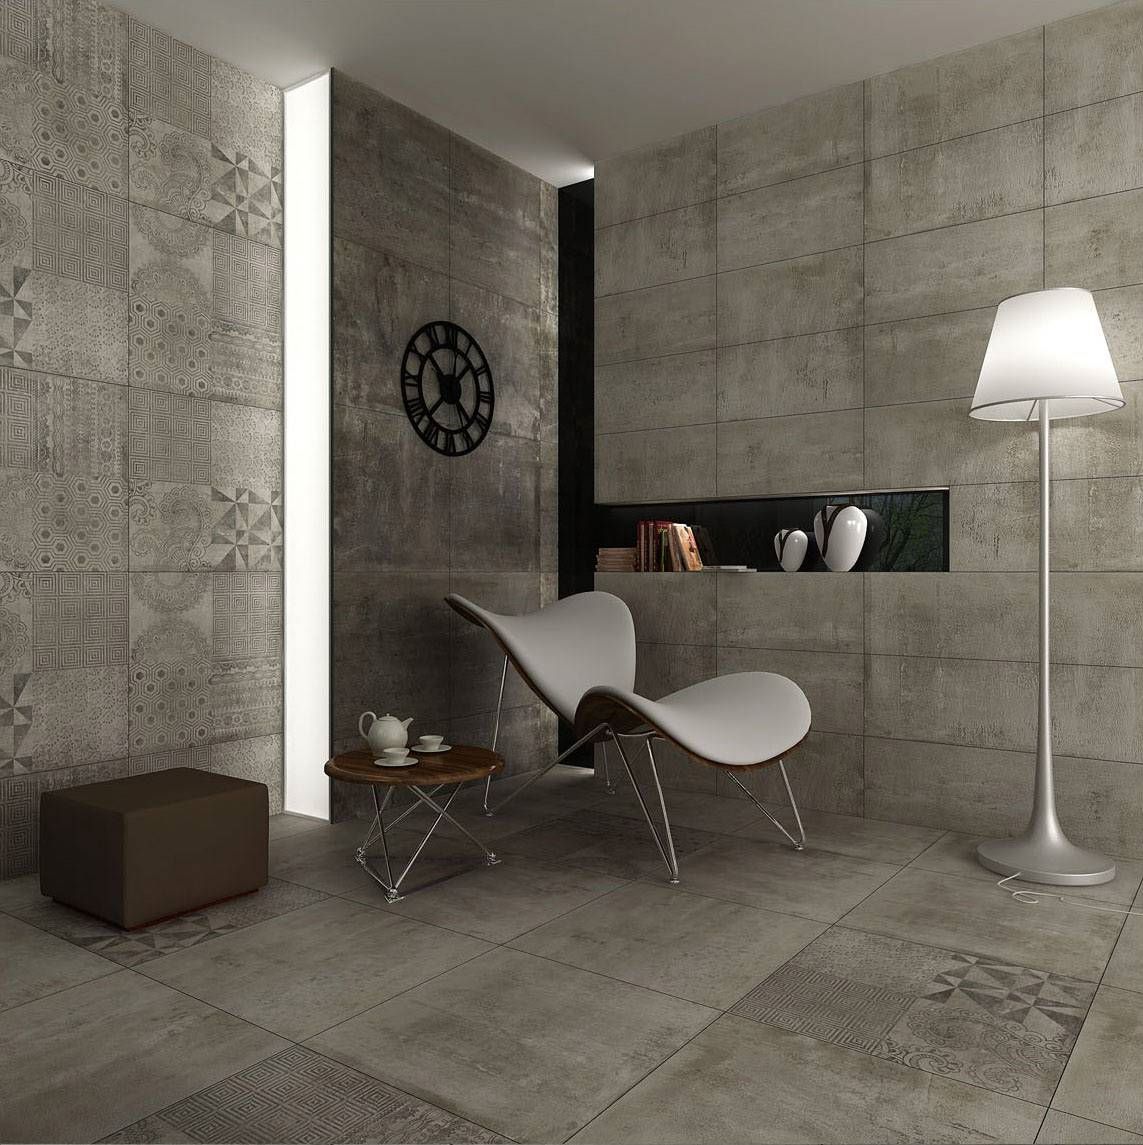 Cemento Graphite | Stones & More | Finest selection of Mosaics, Glass, Tile and Stone